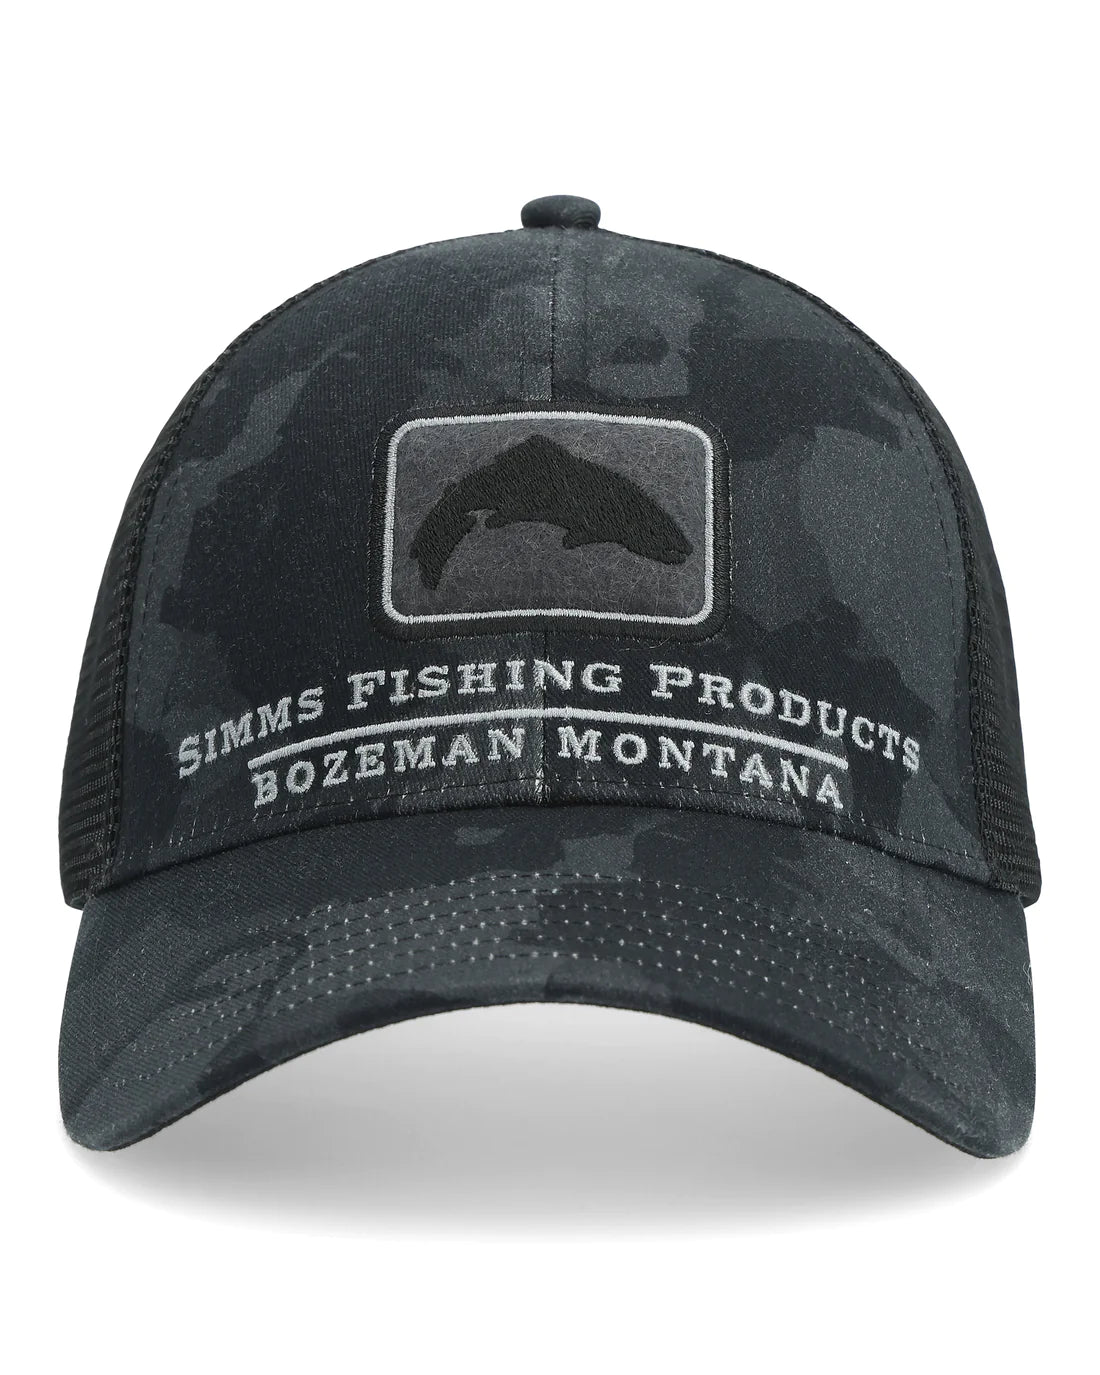 Simms Trout Icon Trucker - OSFM / REGIMENT CAMO CARBON - Mansfield Hunting & Fishing - Products to prepare for Corona Virus